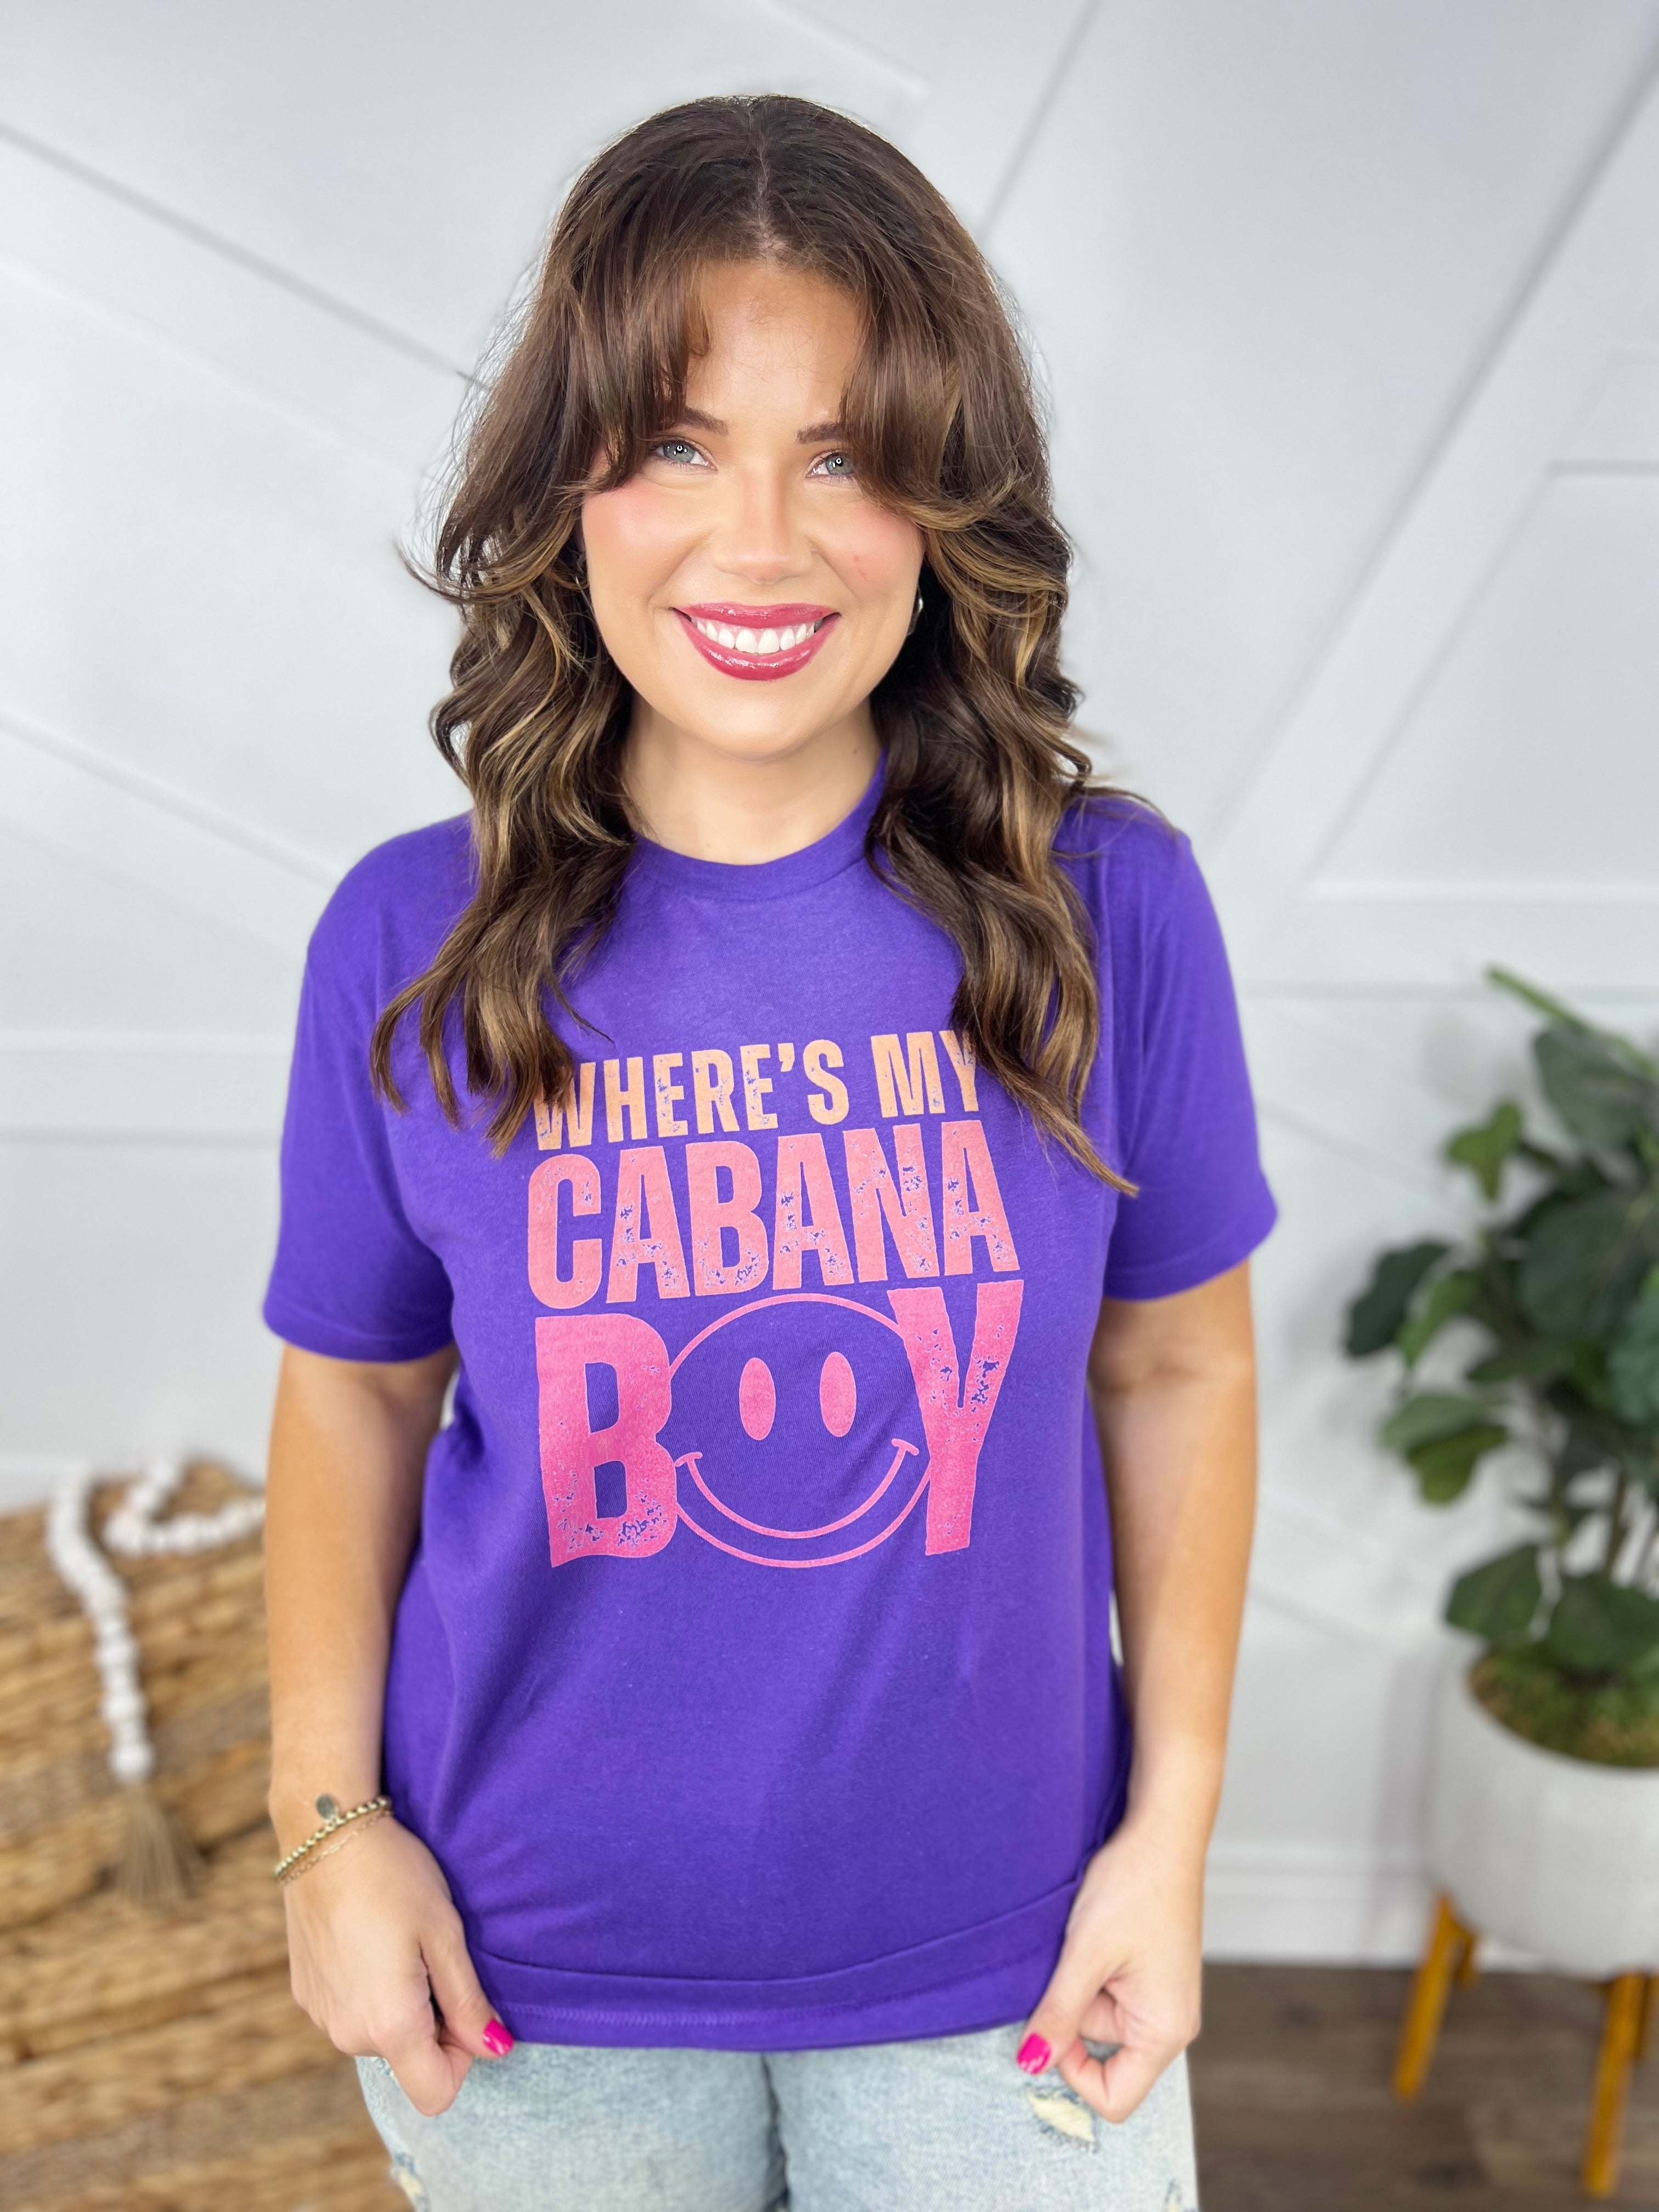 Cabana Boy Graphic Tee-130 Graphic Tees-Heathered Boho-Heathered Boho Boutique, Women's Fashion and Accessories in Palmetto, FL